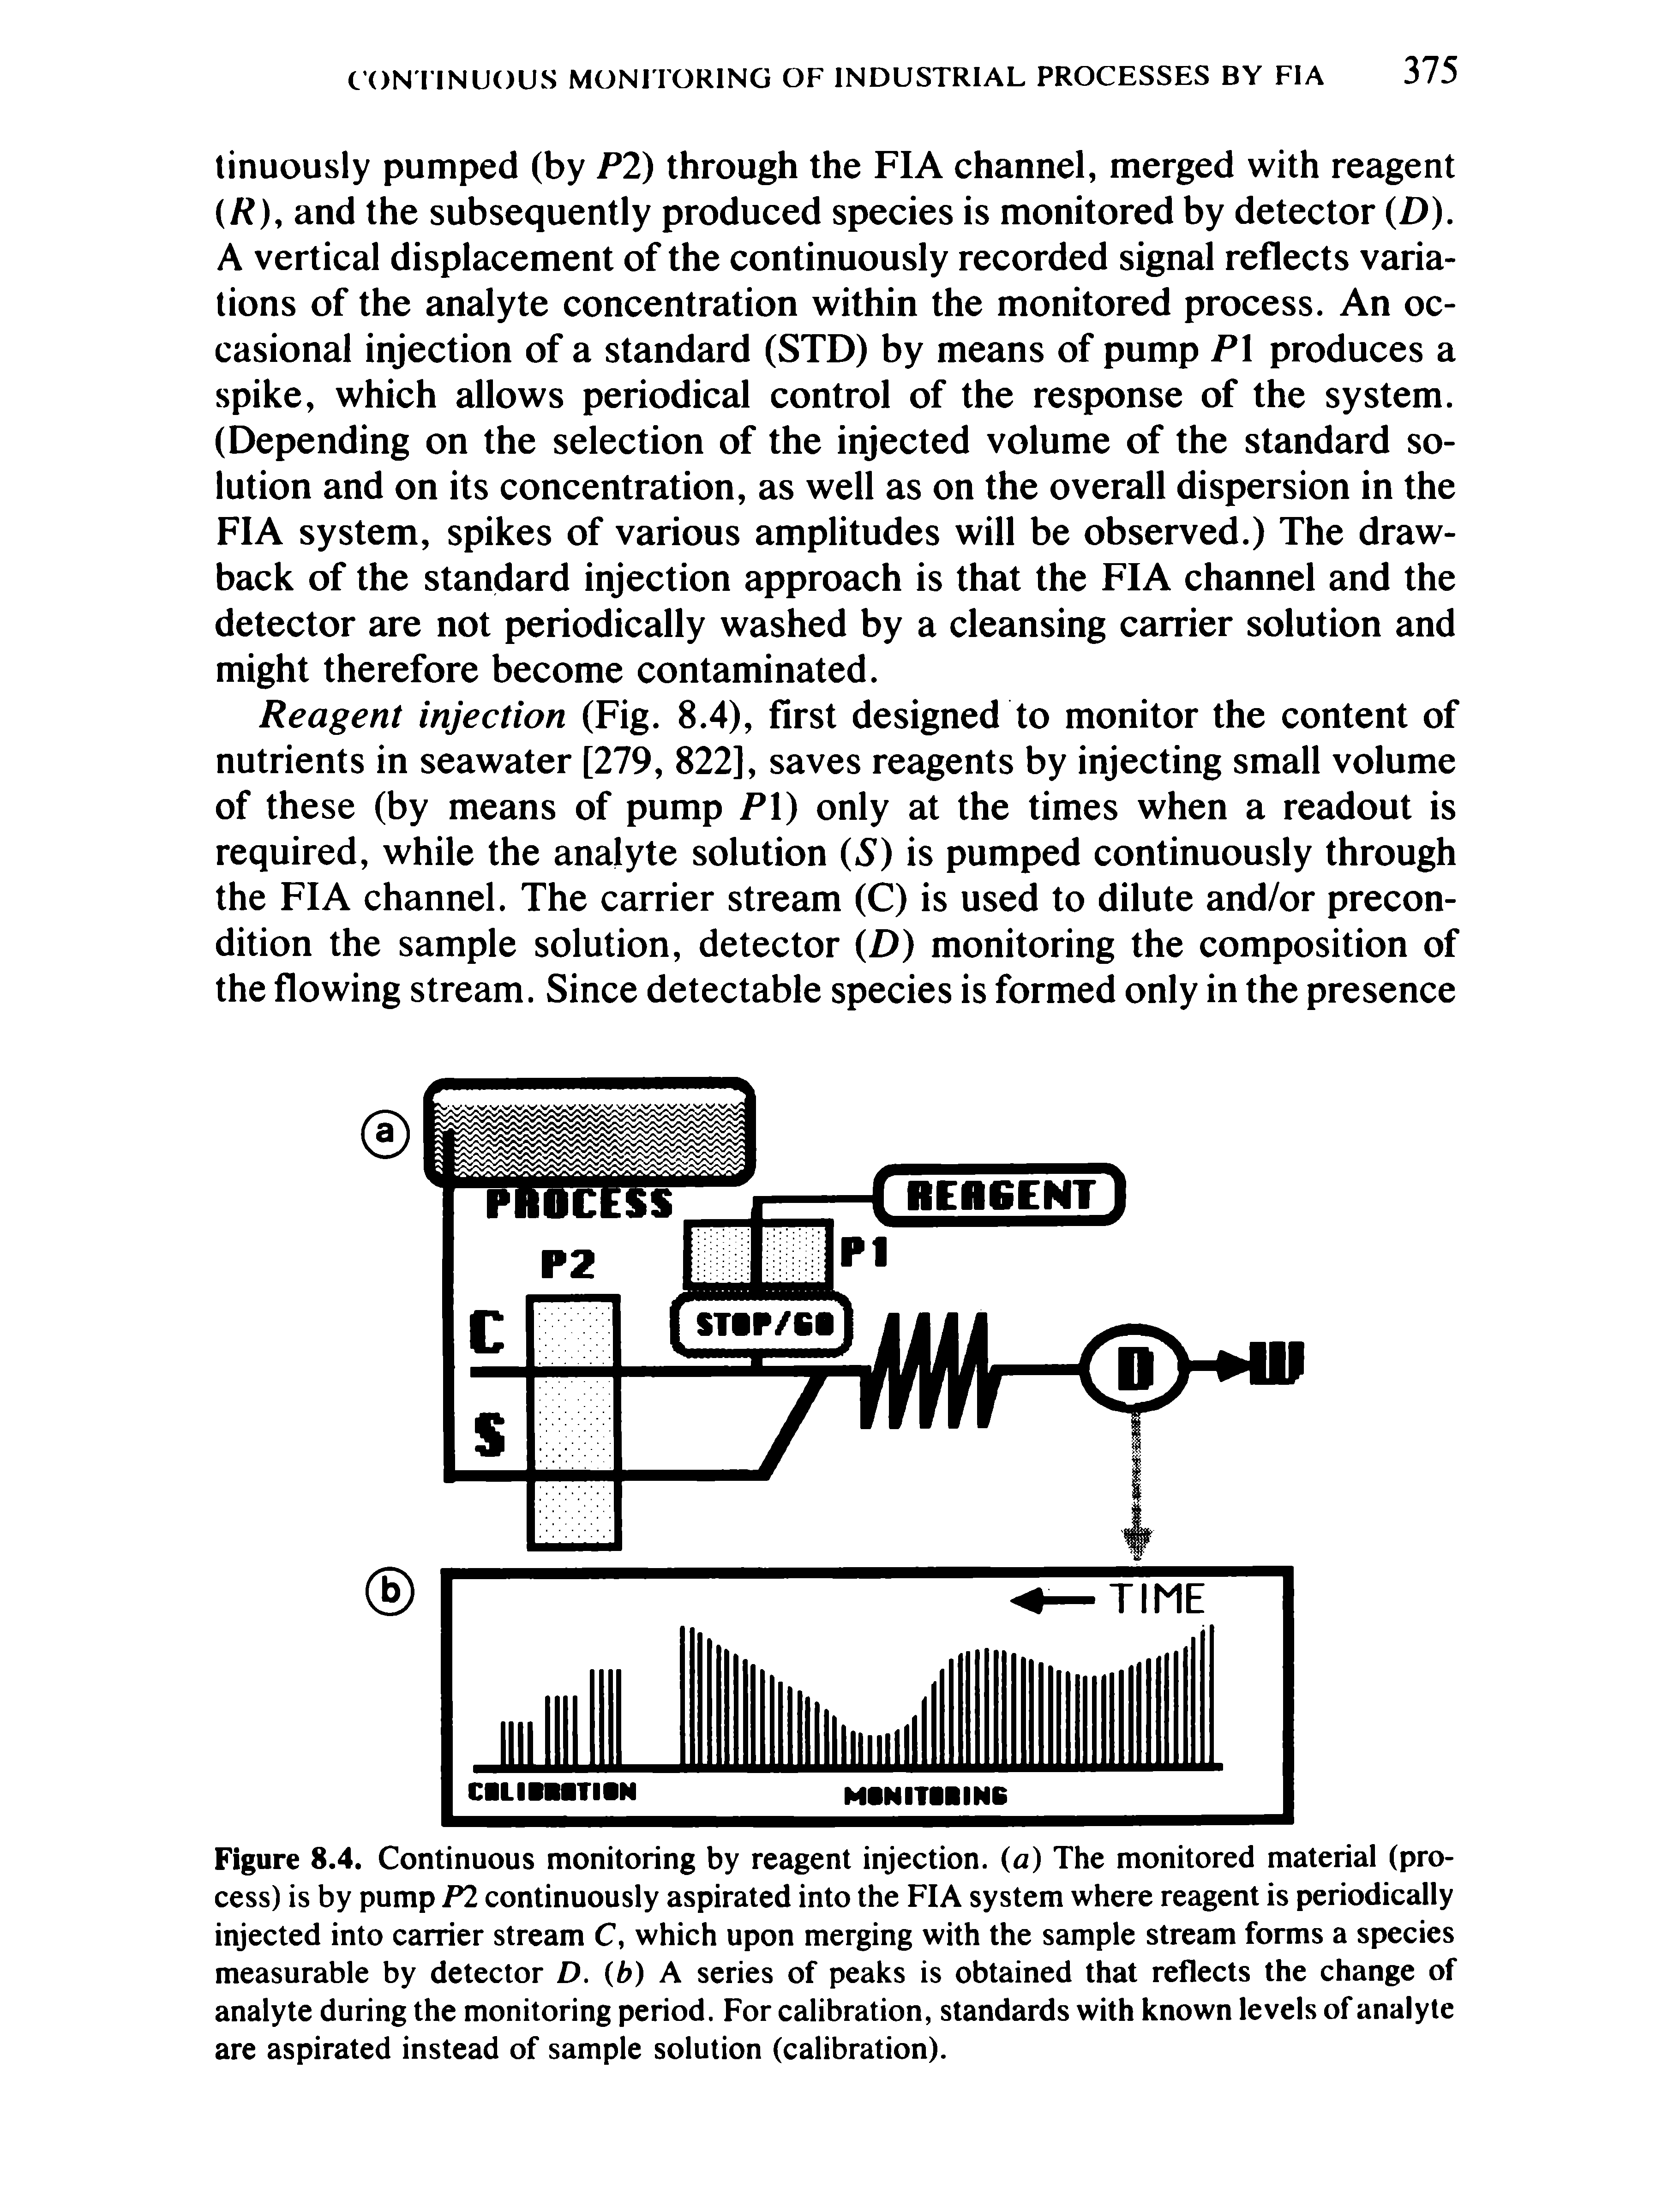 Figure 8.4. Continuous monitoring by reagent injection, (a) The monitored material (process) is by pump PI continuously aspirated into the FIA system where reagent is periodically injected into carrier stream C, which upon merging with the sample stream forms a species measurable by detector D. b) A series of peaks is obtained that reflects the change of analyte during the monitoring period. For calibration, standards with known levels of analyte are aspirated instead of sample solution (calibration).